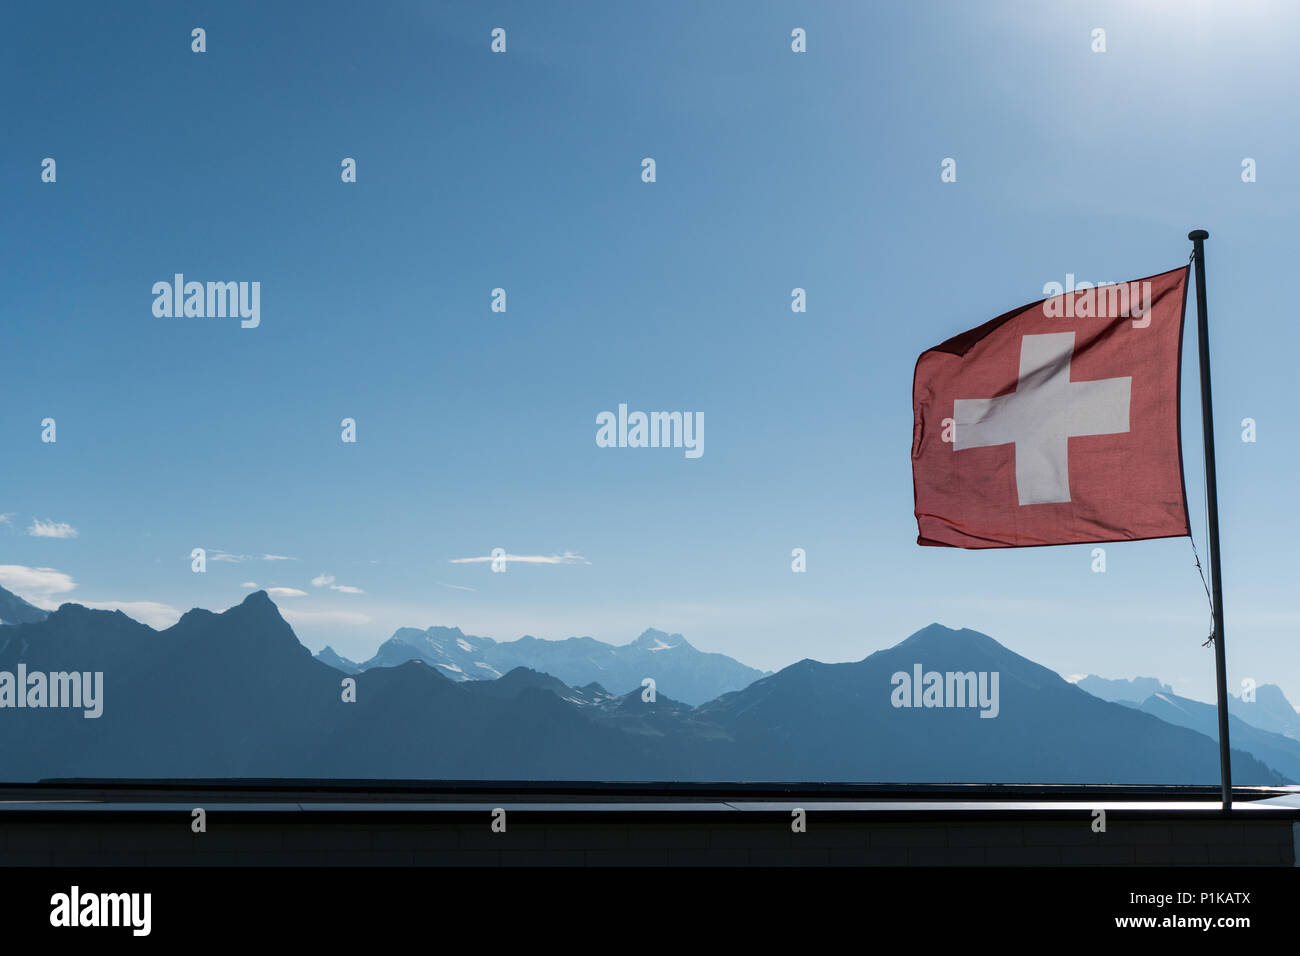 Swiss flag blowing in the wind with a gorgoues mountain landscape and blue sky behind Stock Photo